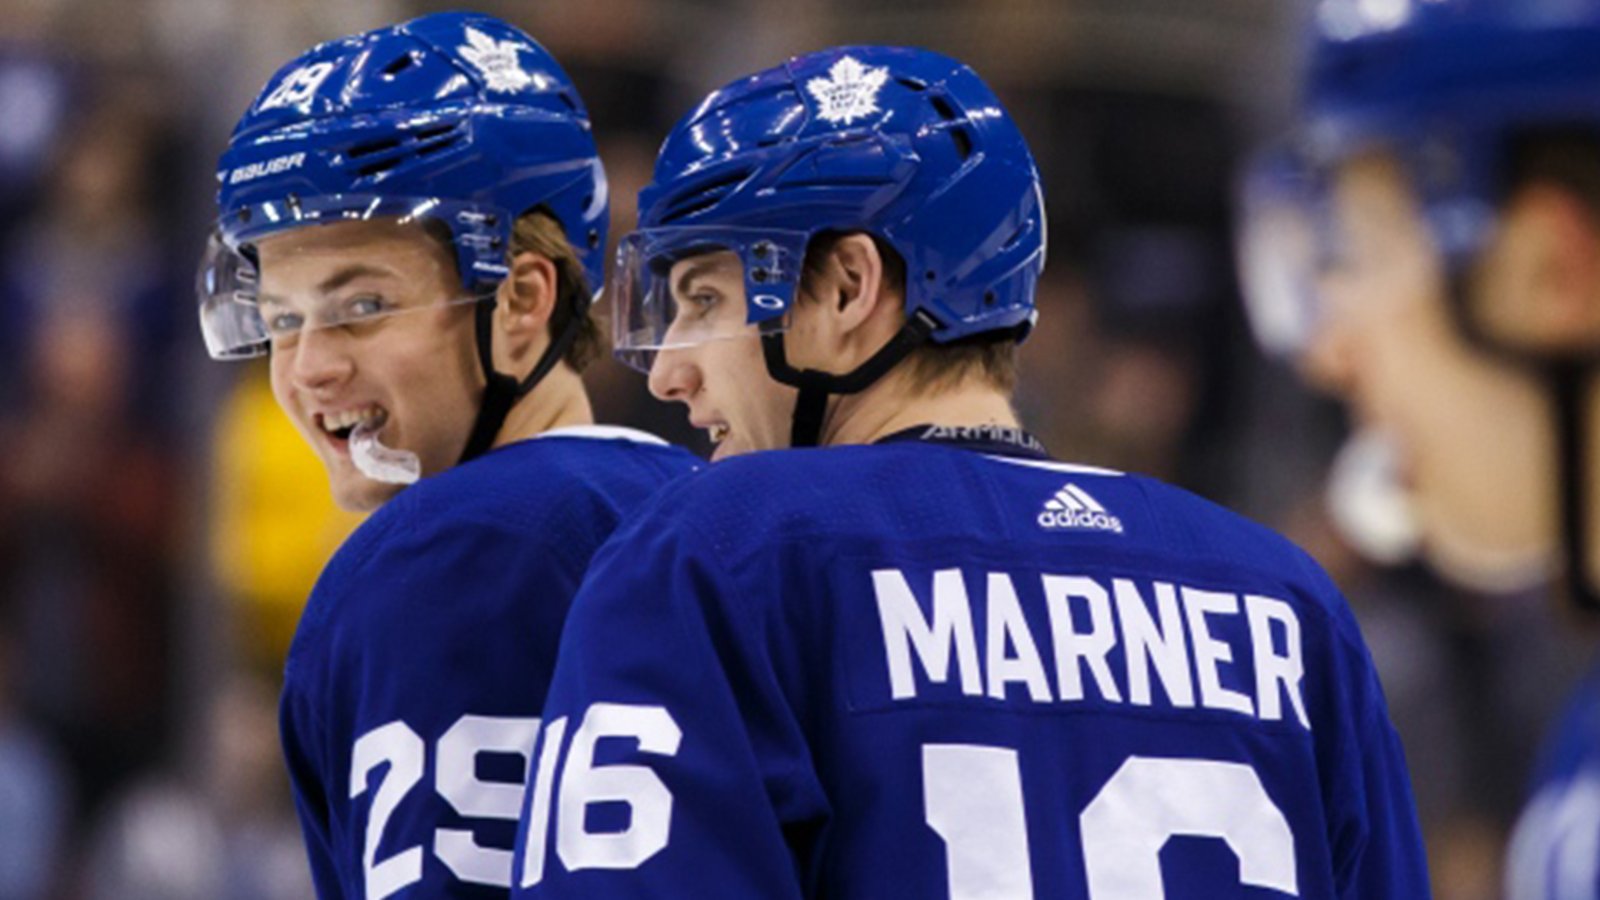 Marner throws shade on Nylander with latest contract comments?